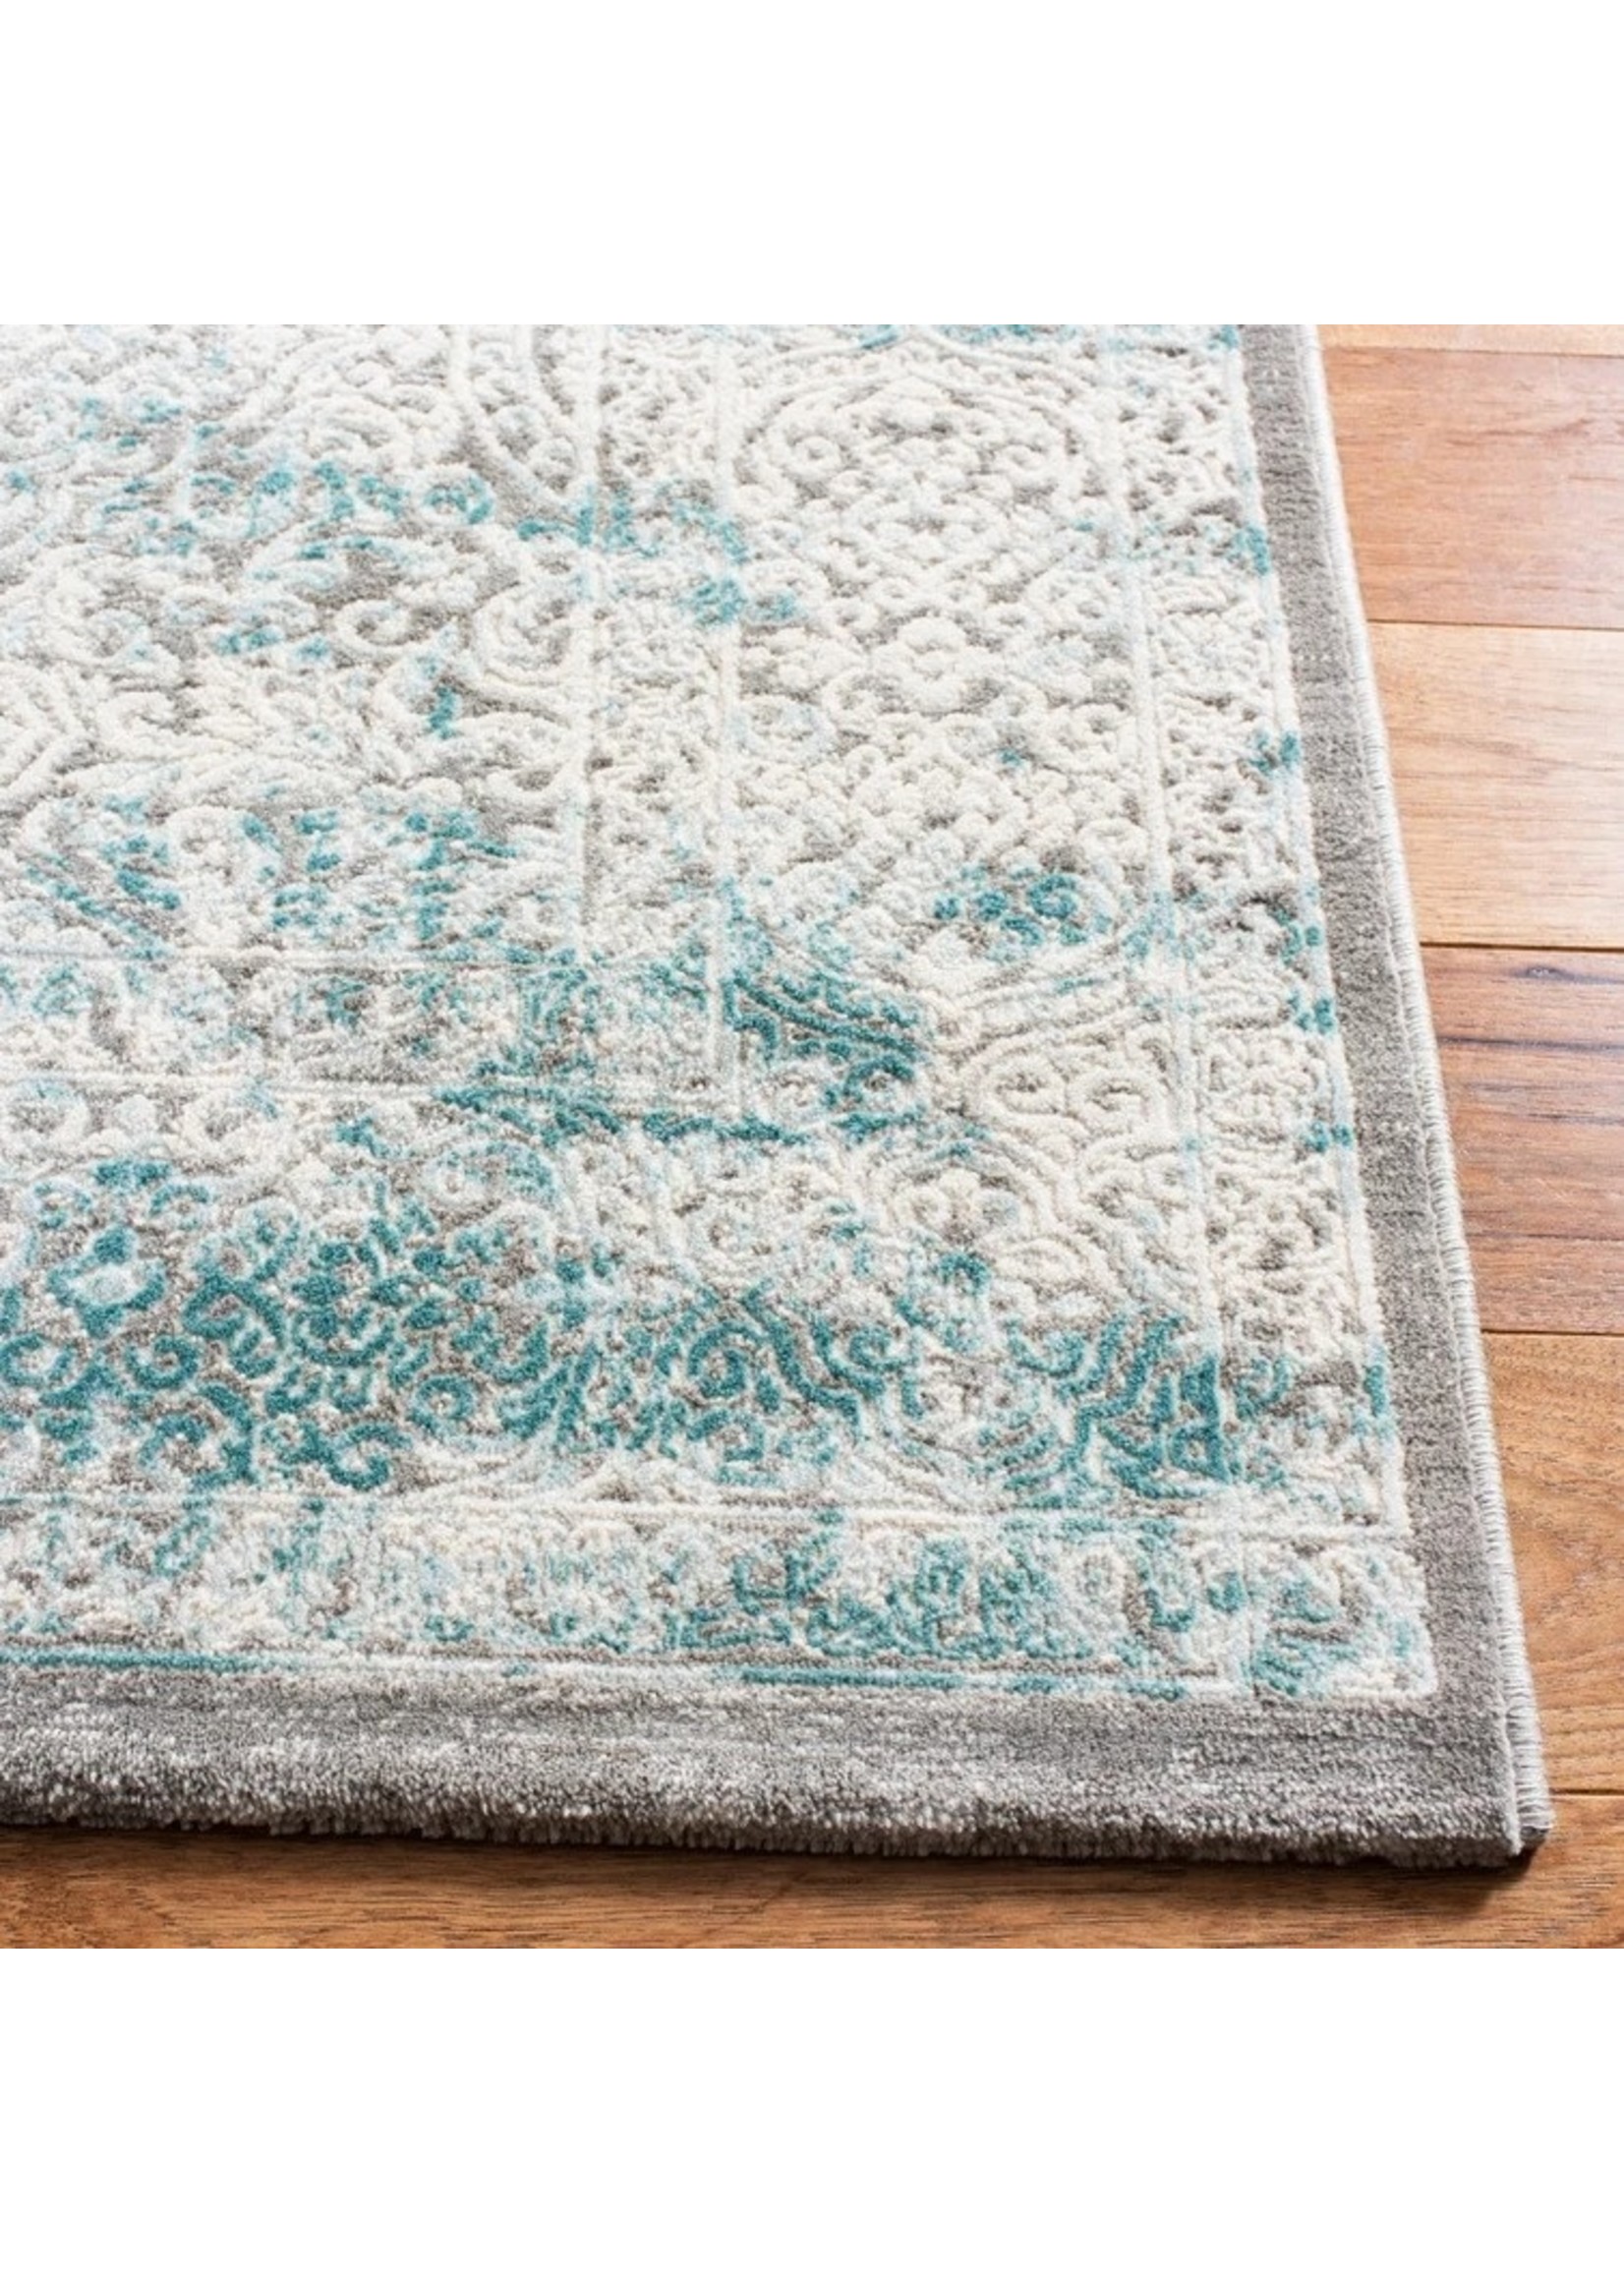 *2'2" x 14' Alpine Abstract Turquoise/Ivory Area Rug